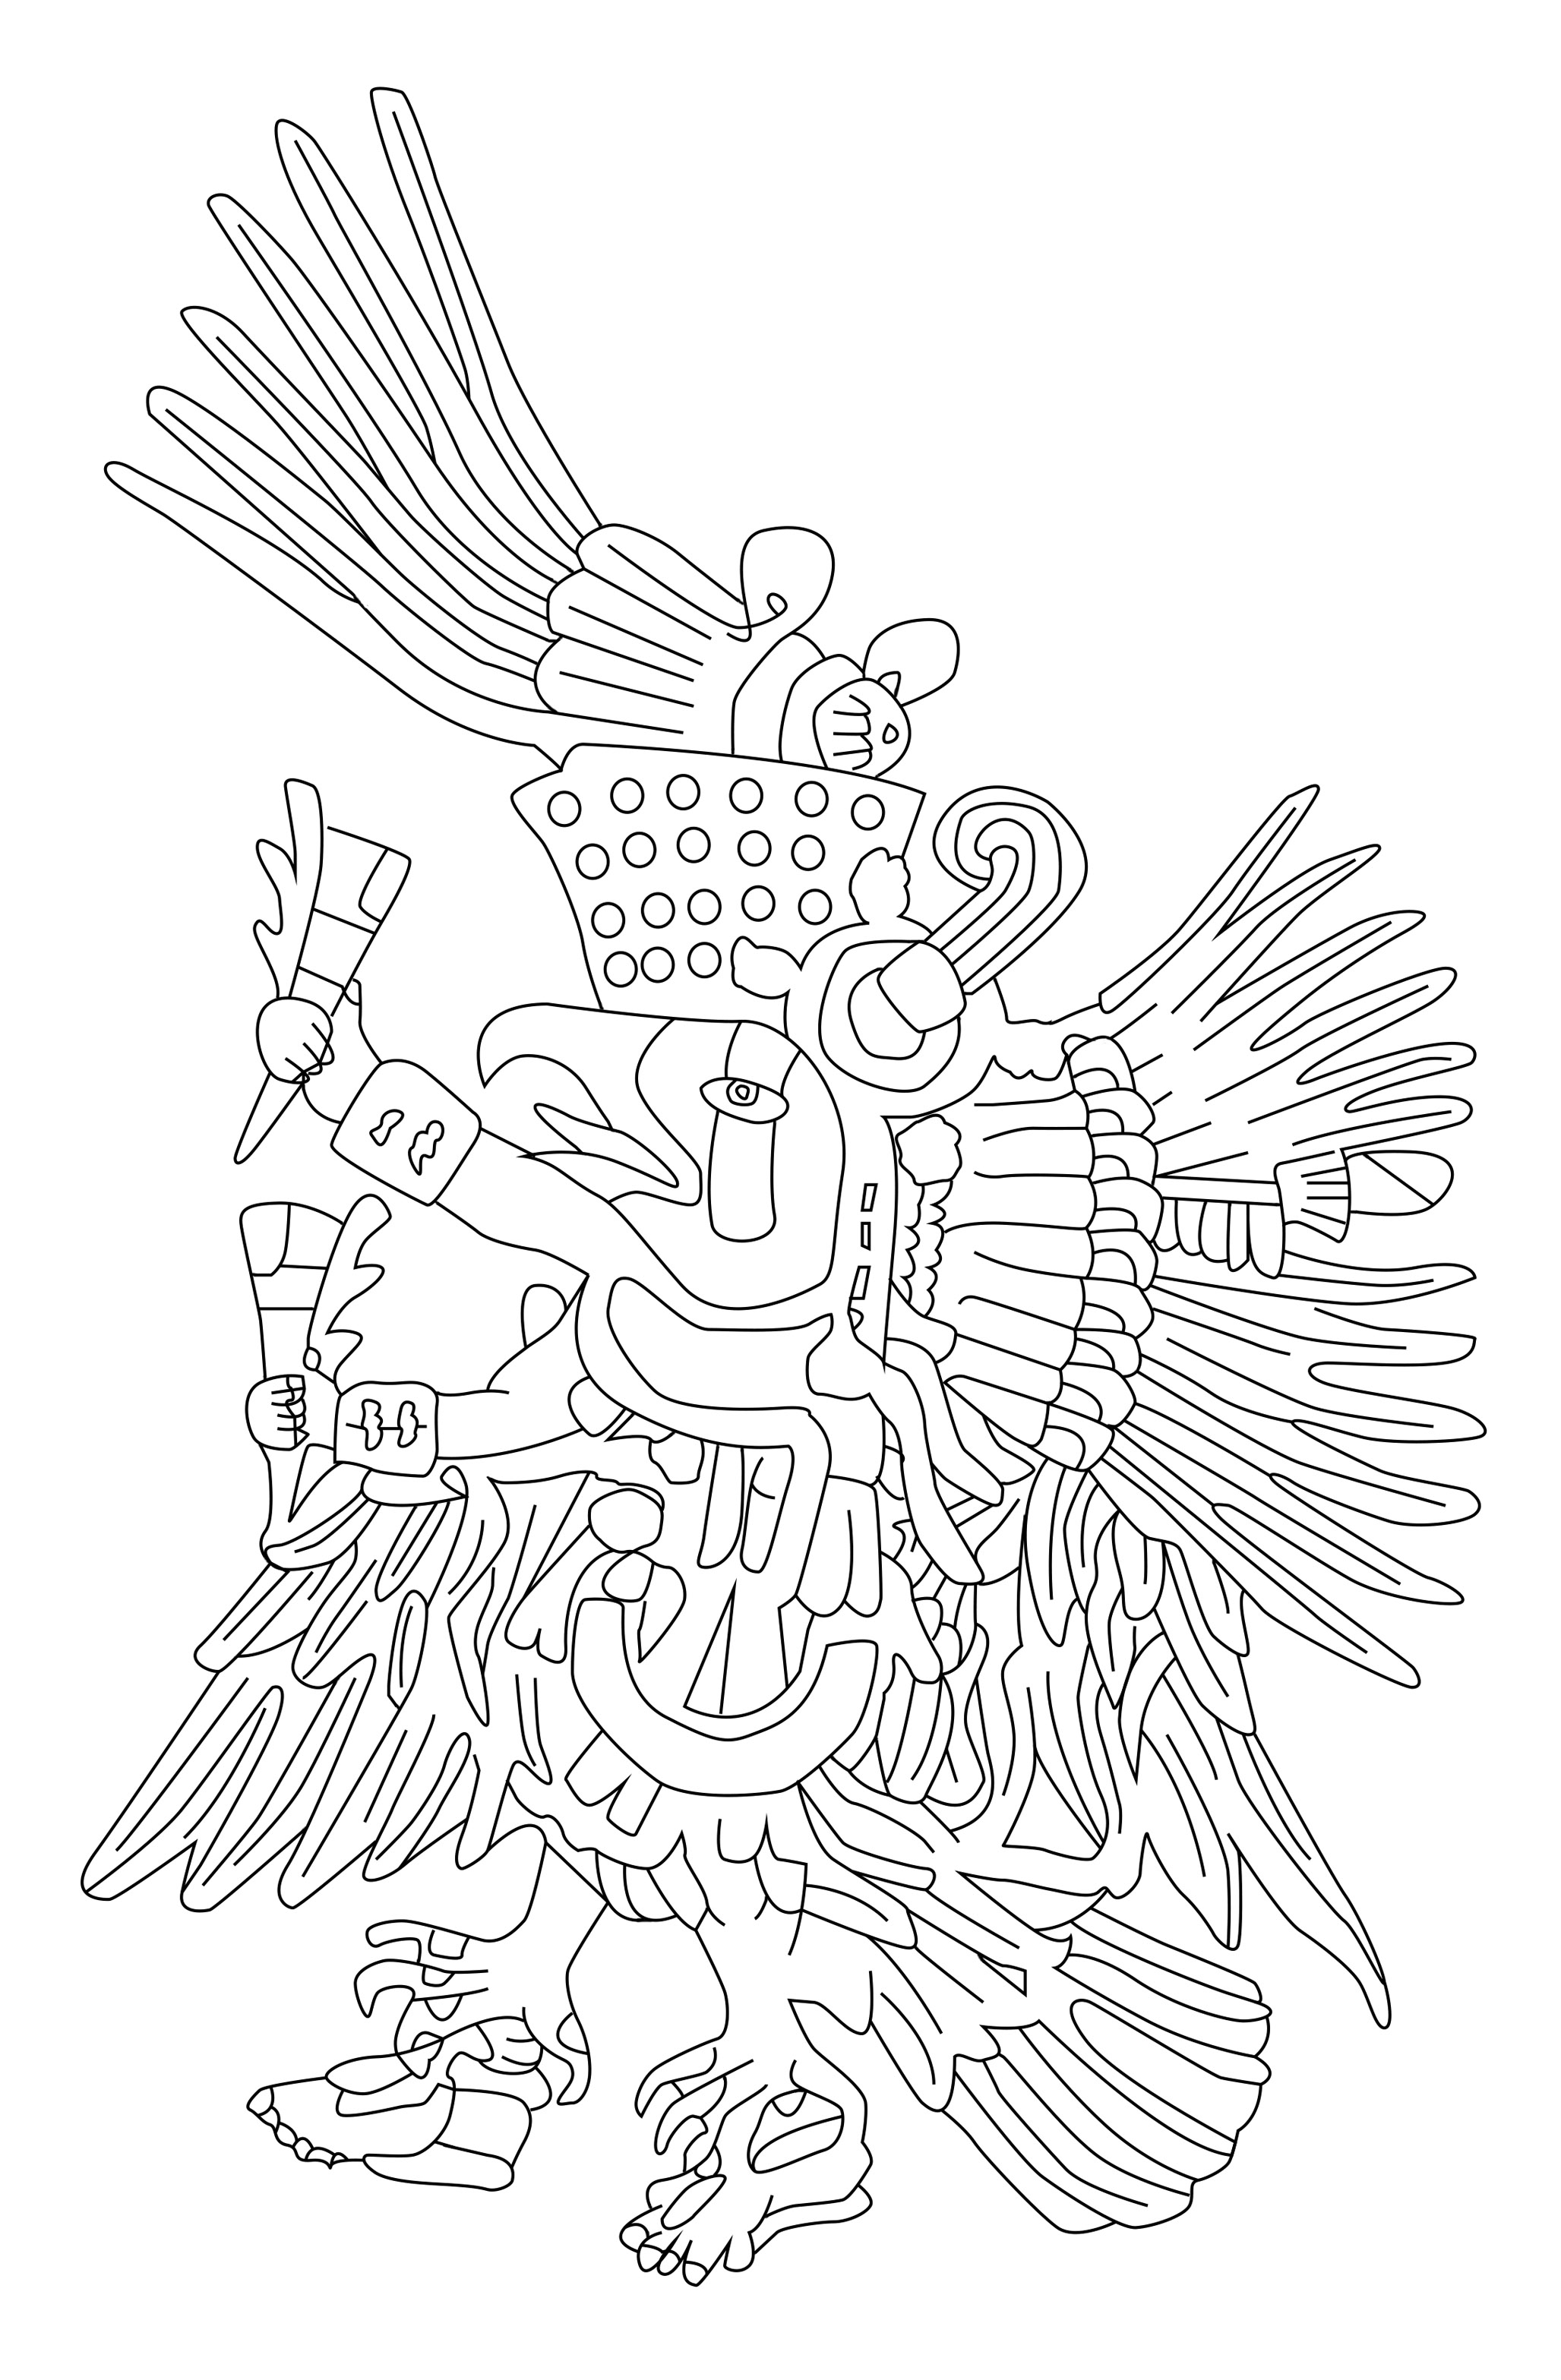 Quetzalcoatl is a Mesoamerican deity whose name comes from the Nahuatl language and means 'feathered serpent'. Color it !, Artist : Rachel